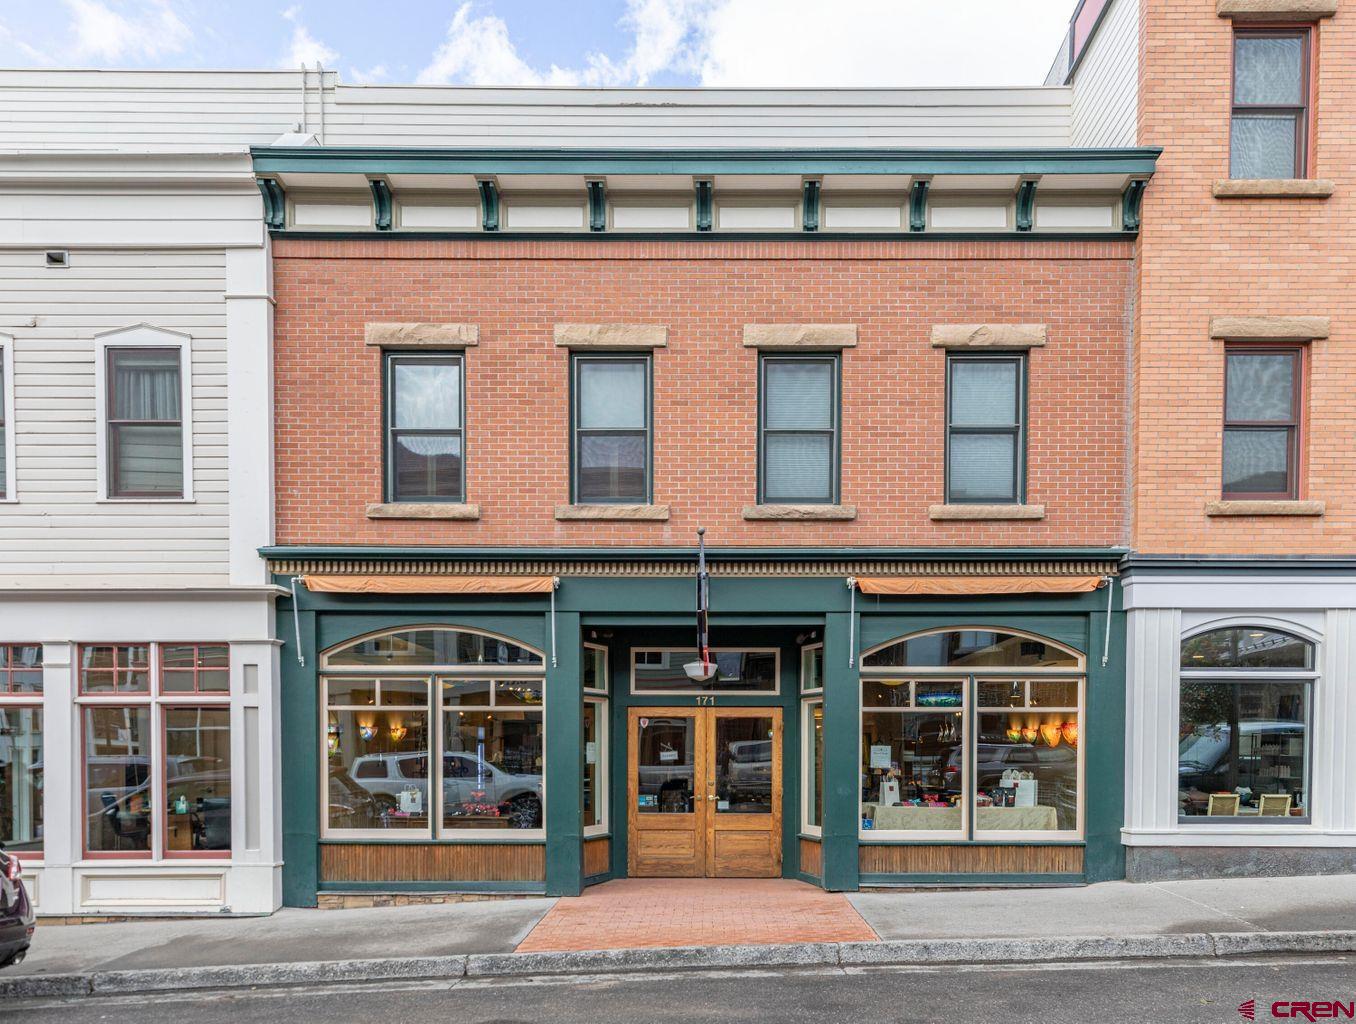 An ideal retail or investment opportunity in the pulse of downtown Telluride. This prime 1,114 sq. ft. retail space enjoys large windows facing pedestrian friendly Pine Street. The space is open and flexible, for use as a professional office or as a retail space. A tremendous opportunity to own on this high visibility location across from Alpine Bank, around the corner from the Wilkinson Public Library, and two blocks from the Post Office. Also has one assigned off street parking space. Real estate only, business is not for sale.